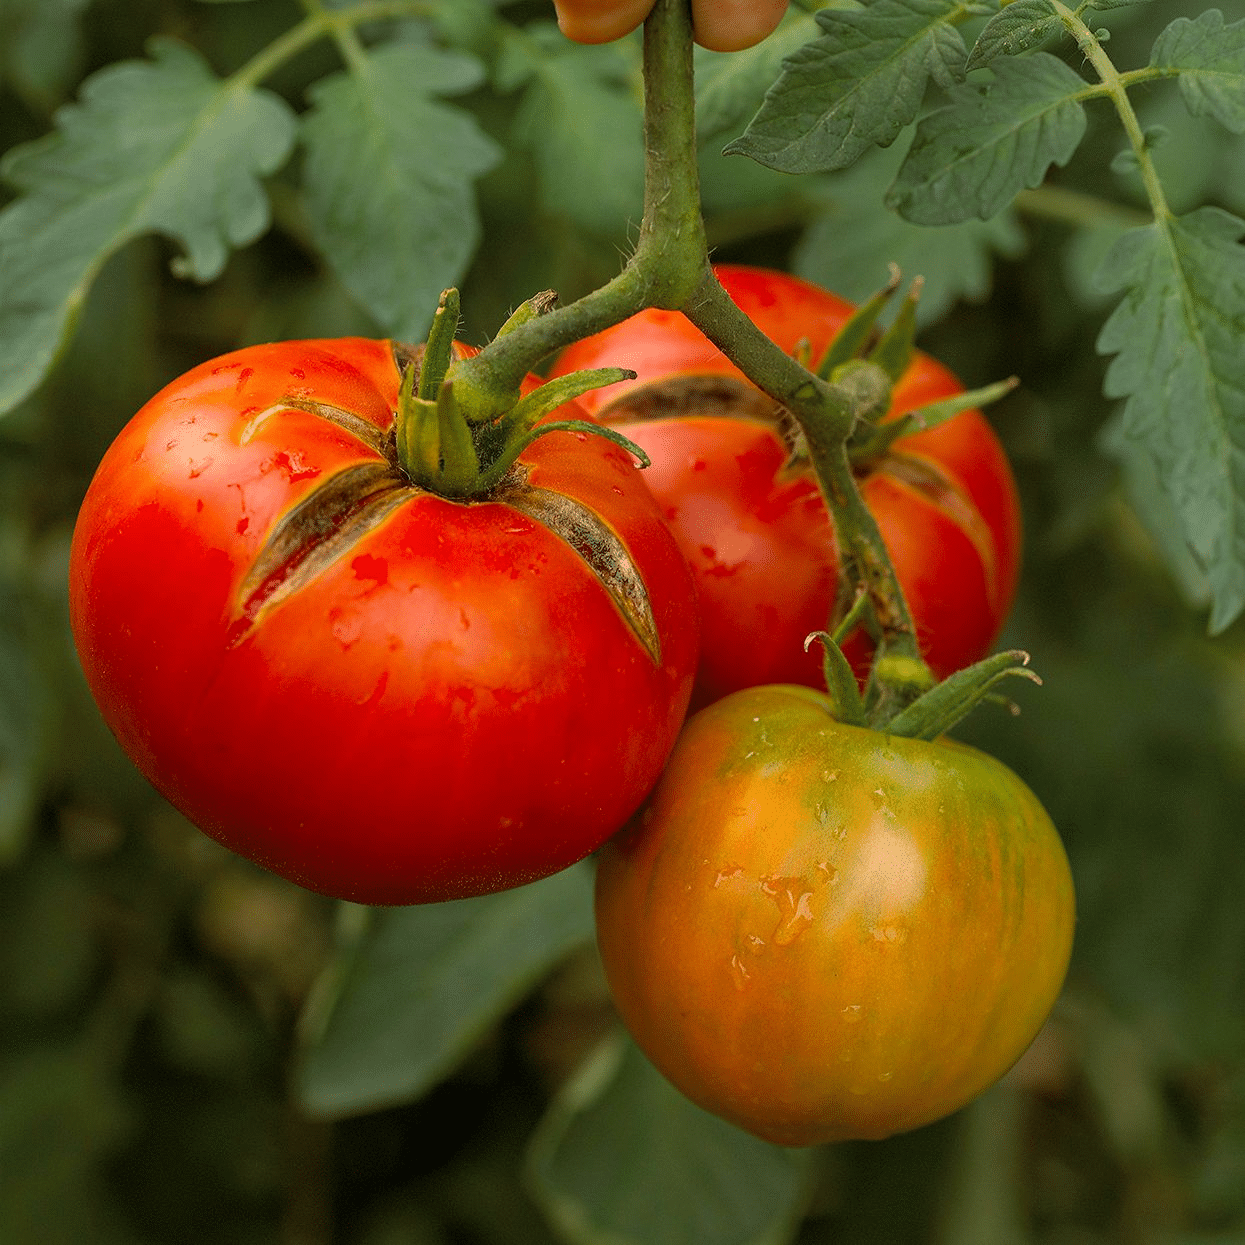 Tomato with nutrient deficiency